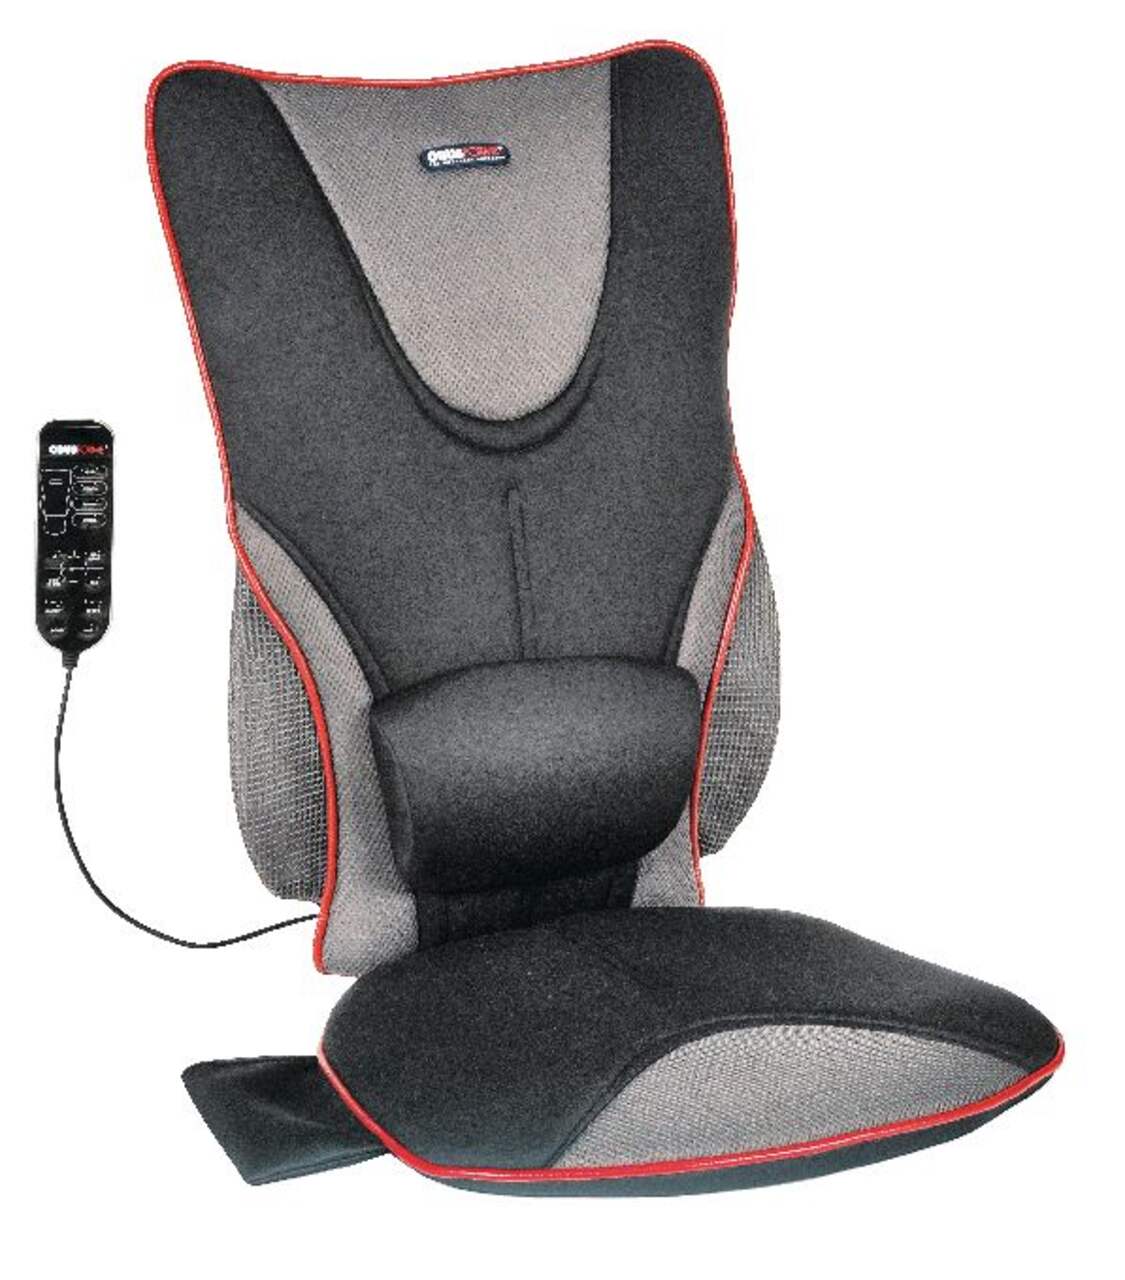 https://media-www.canadiantire.ca/product/automotive/car-care-accessories/auto-comfort/0321488/obus-forme-8-motor-massage-seat-cushion-136bedec-997b-4bbd-a3e9-e7ed744f4533-jpgrendition.jpg?imdensity=1&imwidth=1244&impolicy=mZoom